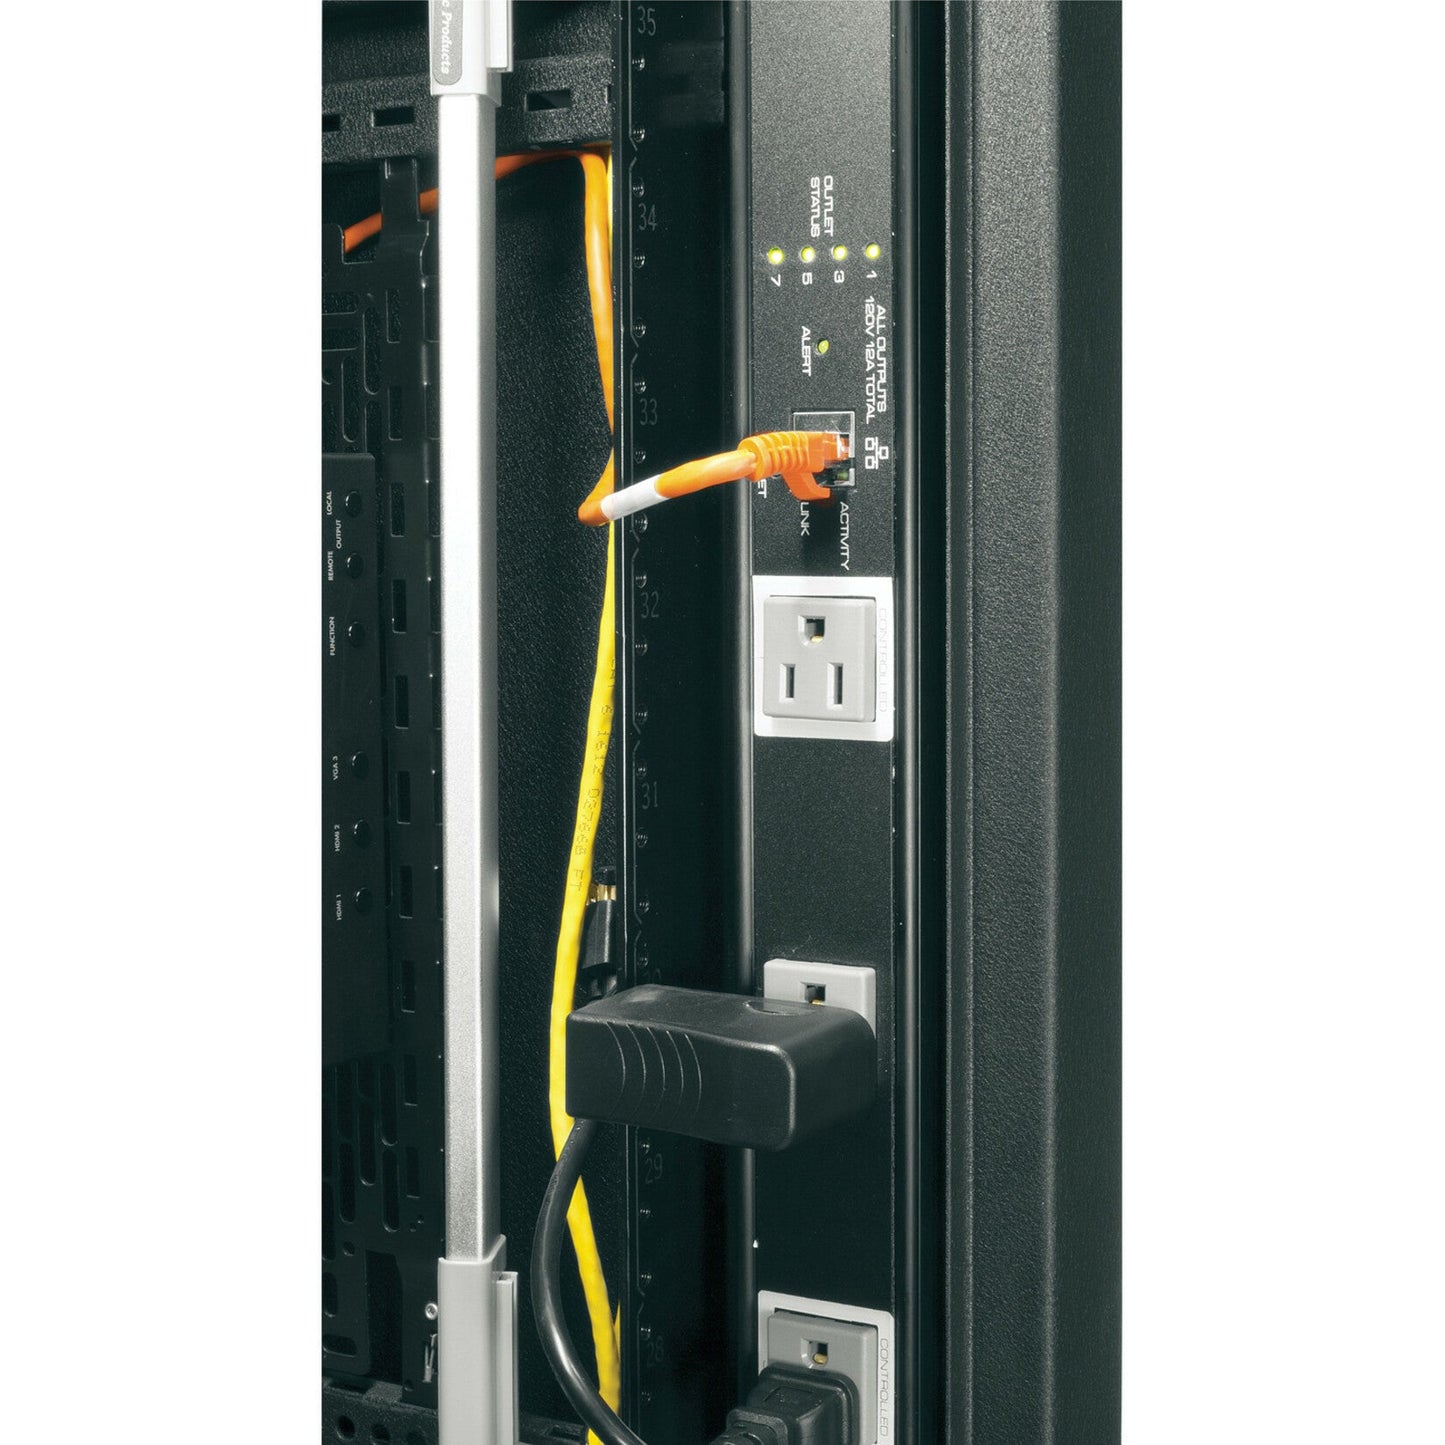 Middle Atlantic Select Series Power Distribution Unit with RackLink - 16 Outlet